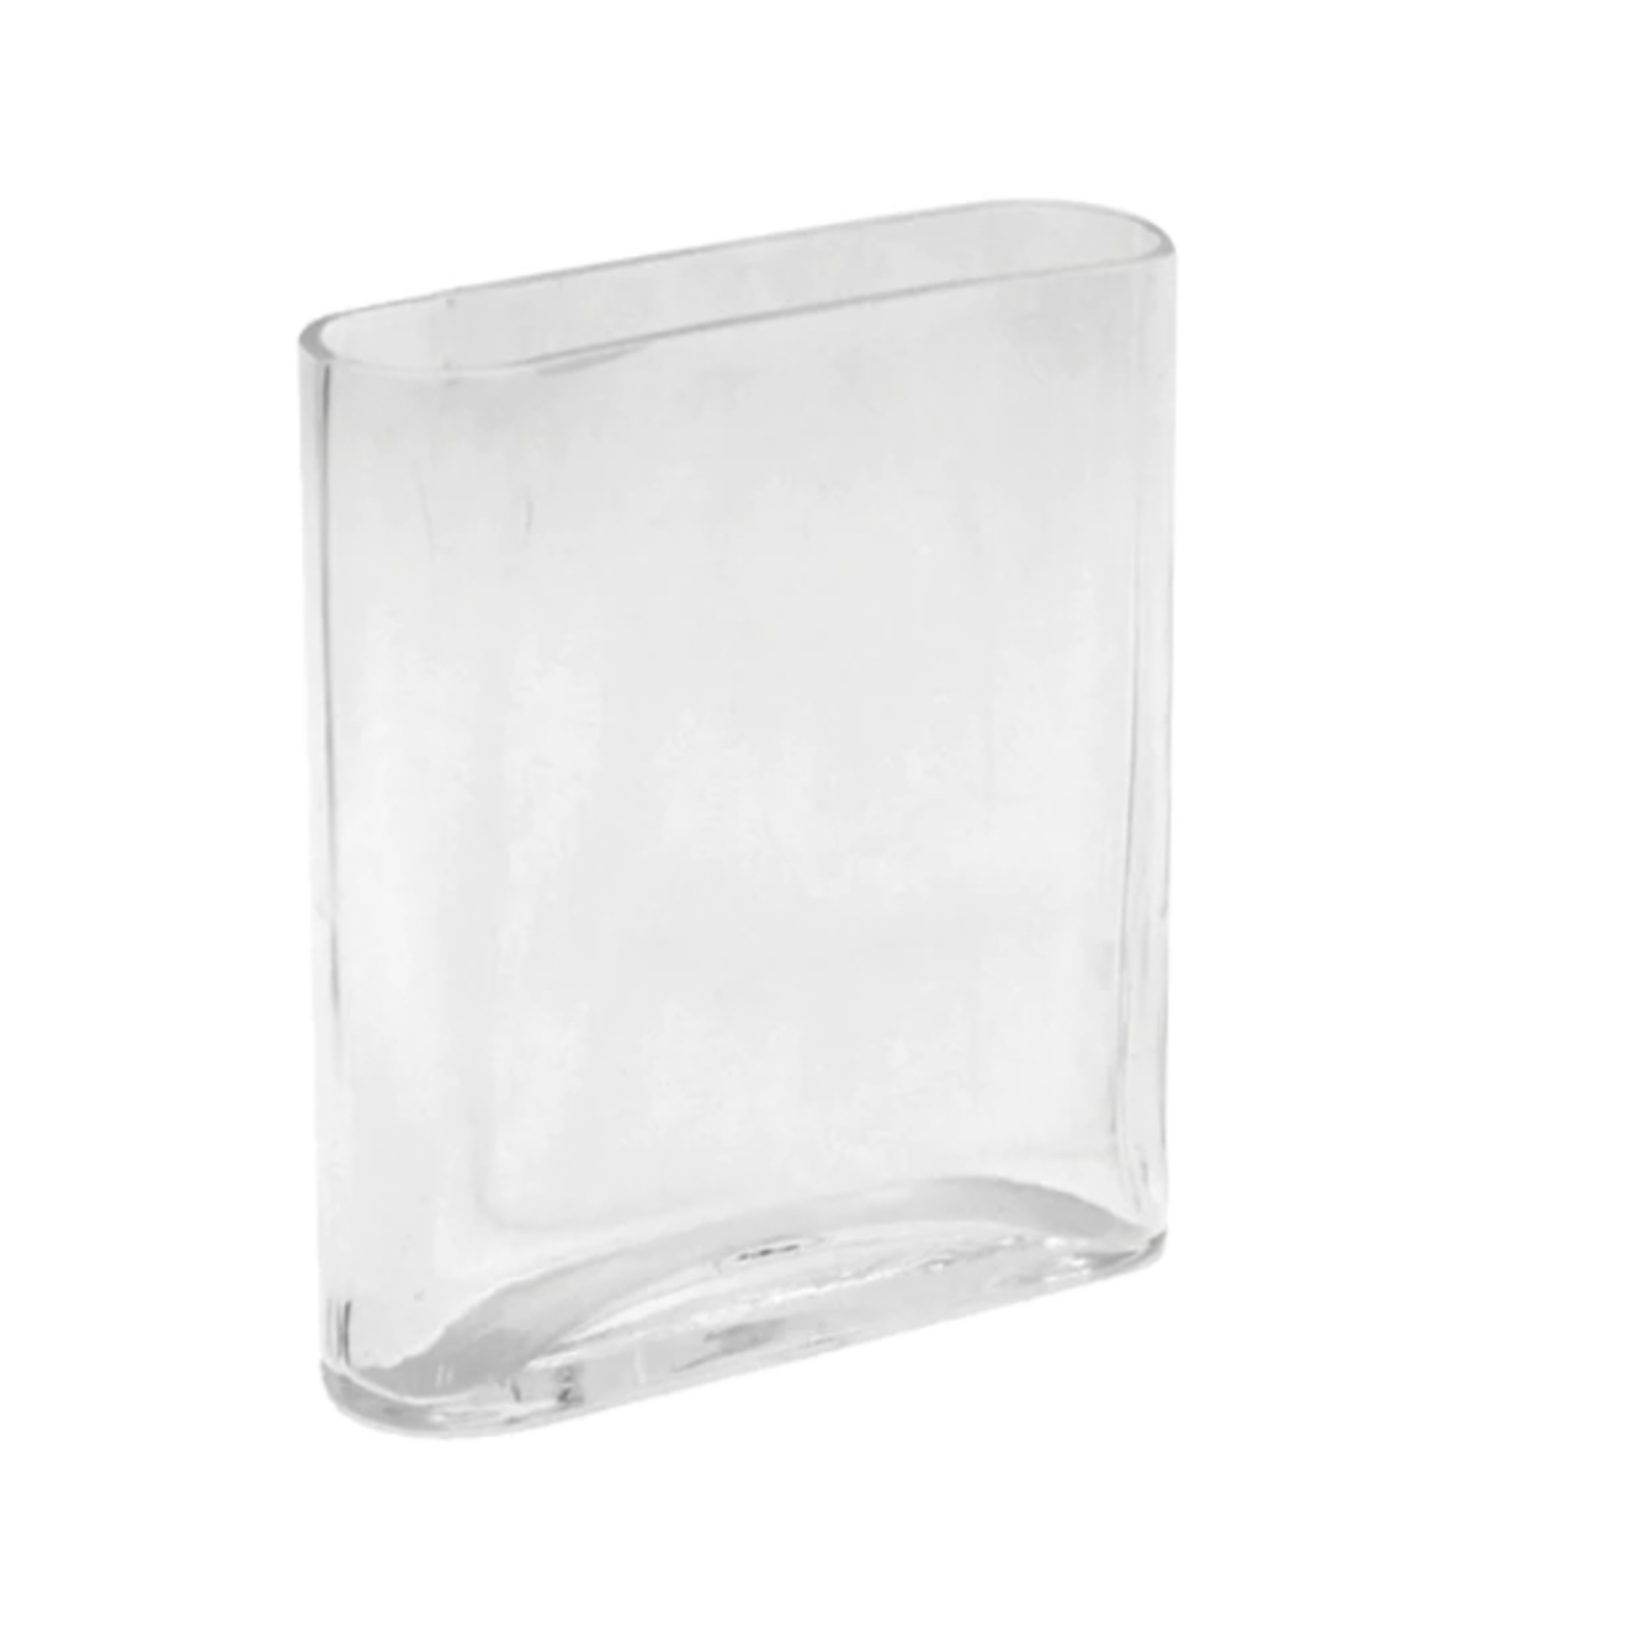 8"H X 7"L X 2" CLEAR NARROW POCKET VASE WITH OVAL CORNERS